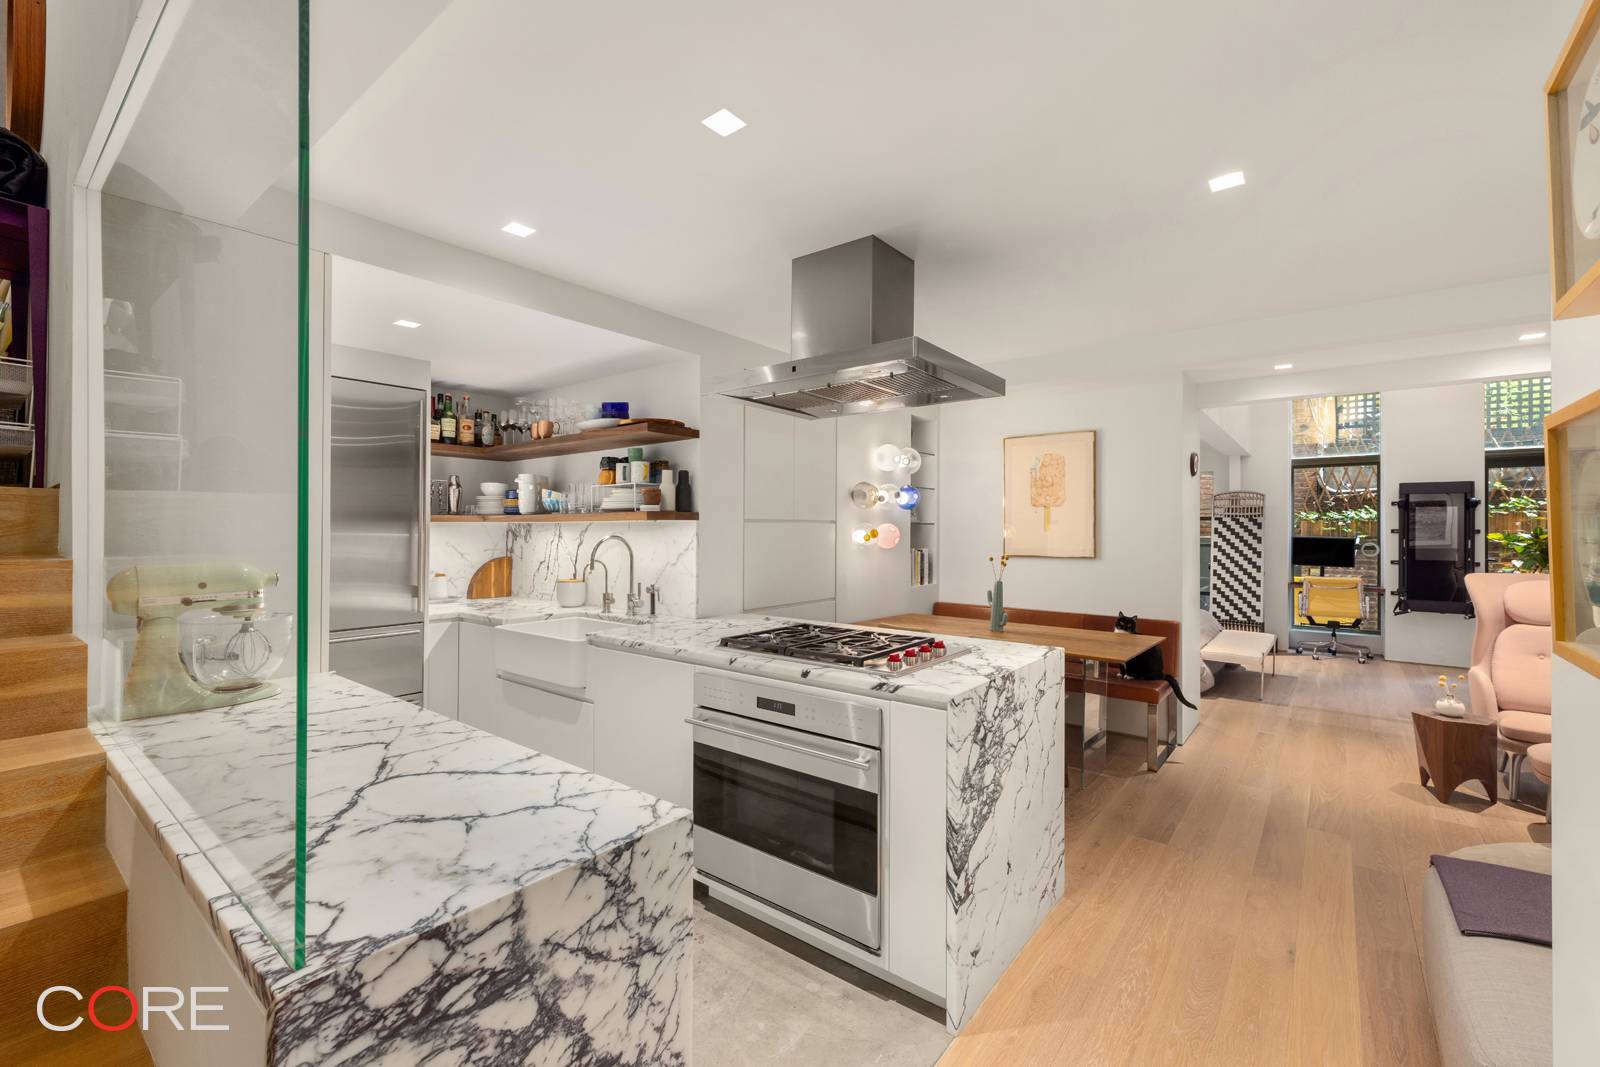 In the heart of Greenwich Village is this rare opportunity for buyers seeking a flawlessly renovated ground floor duplex with private outdoor space and peaceful solitude, within a boutique work ...